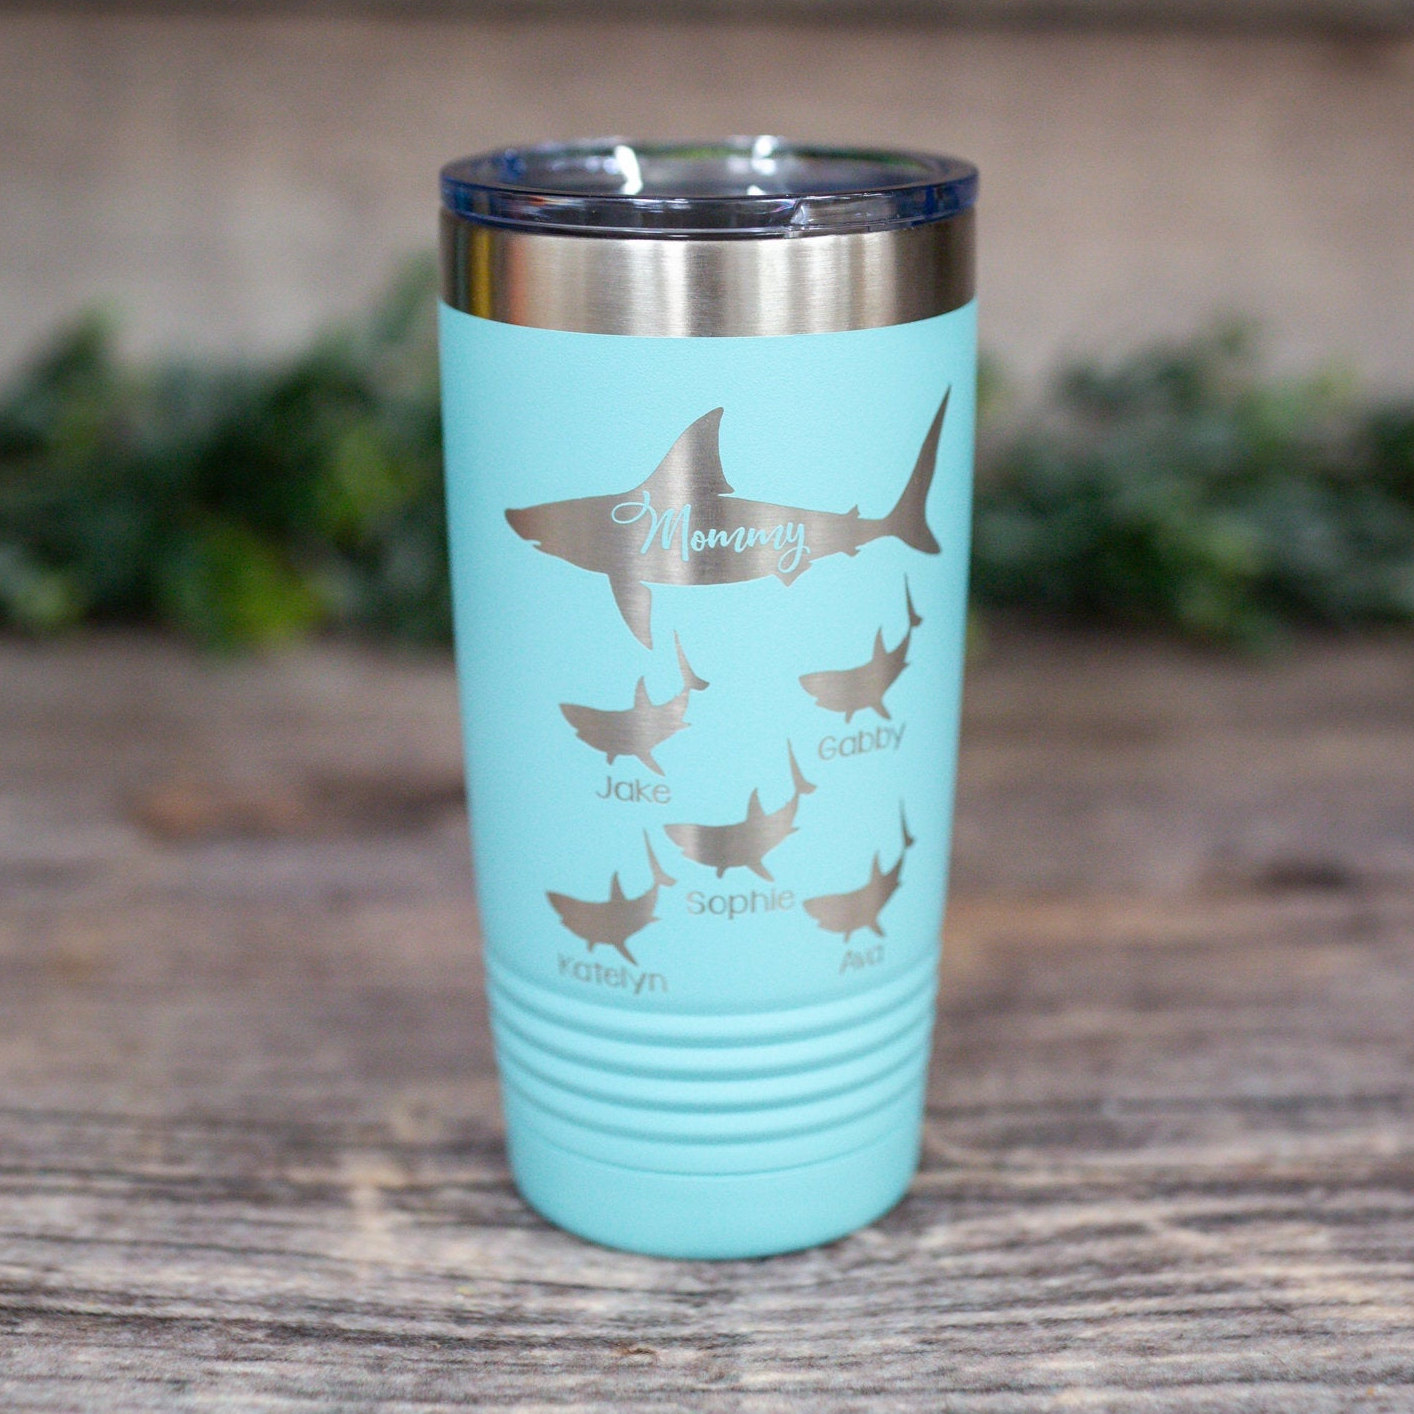 https://3cetching.com/wp-content/uploads/2021/07/shark-family-personalized-with-kids-names-engraved-tumbler-stainless-cup-mom-and-dad-gift-60f75471.jpg